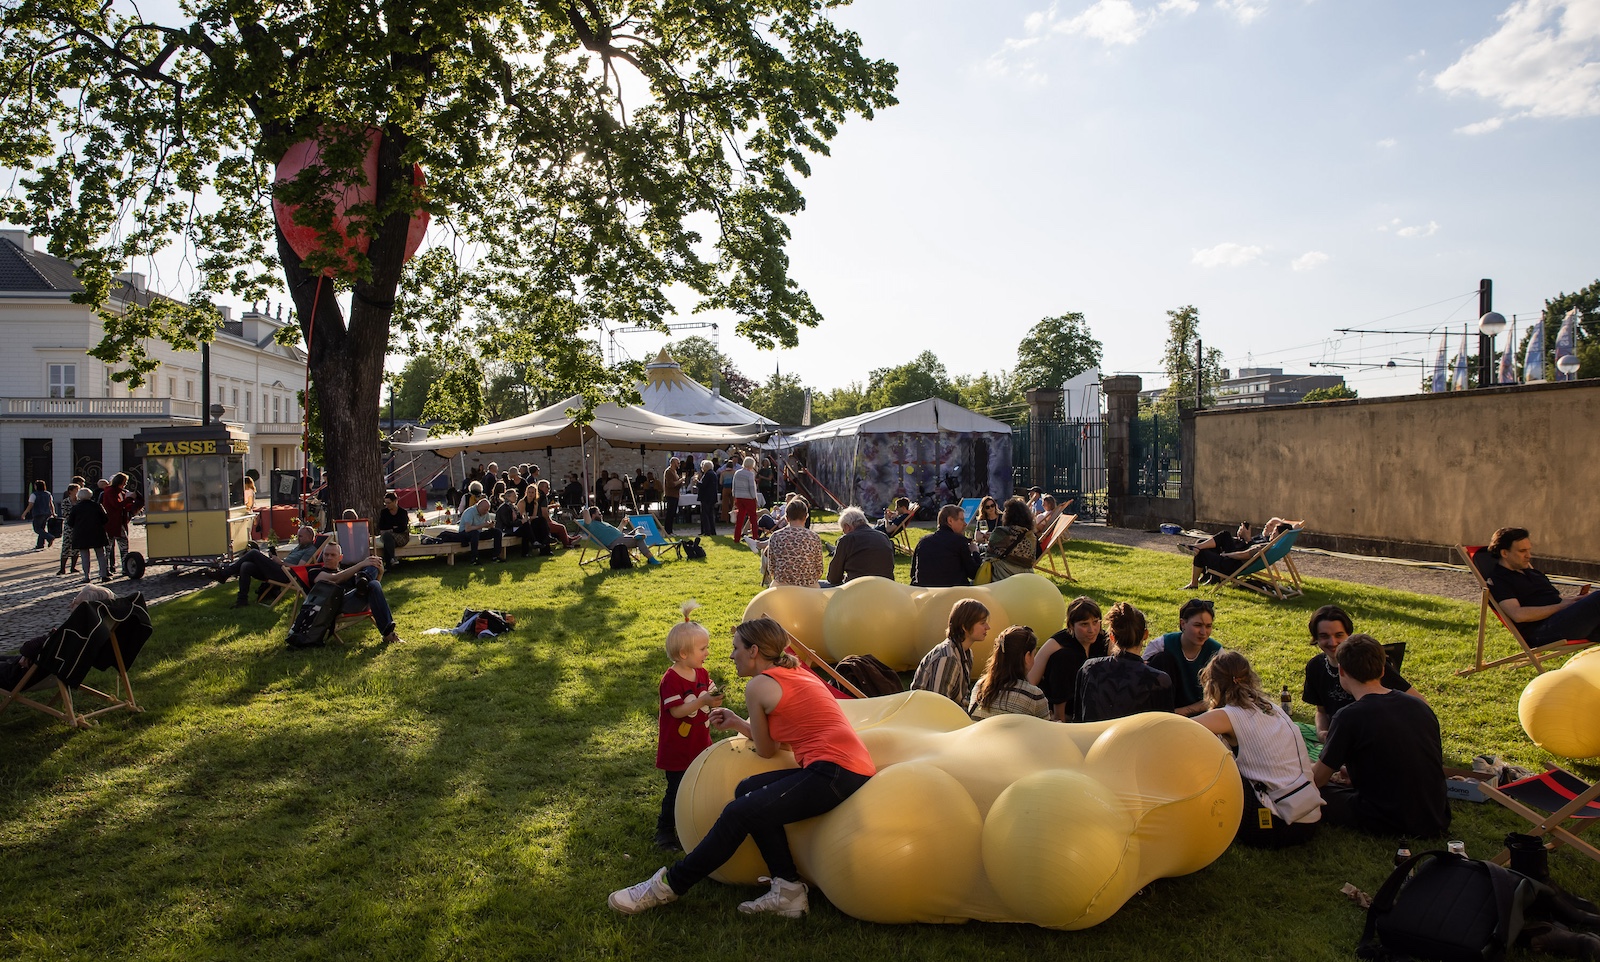 Theatre, music, dance, installation and delicious food: the KunstFestspiele Tag